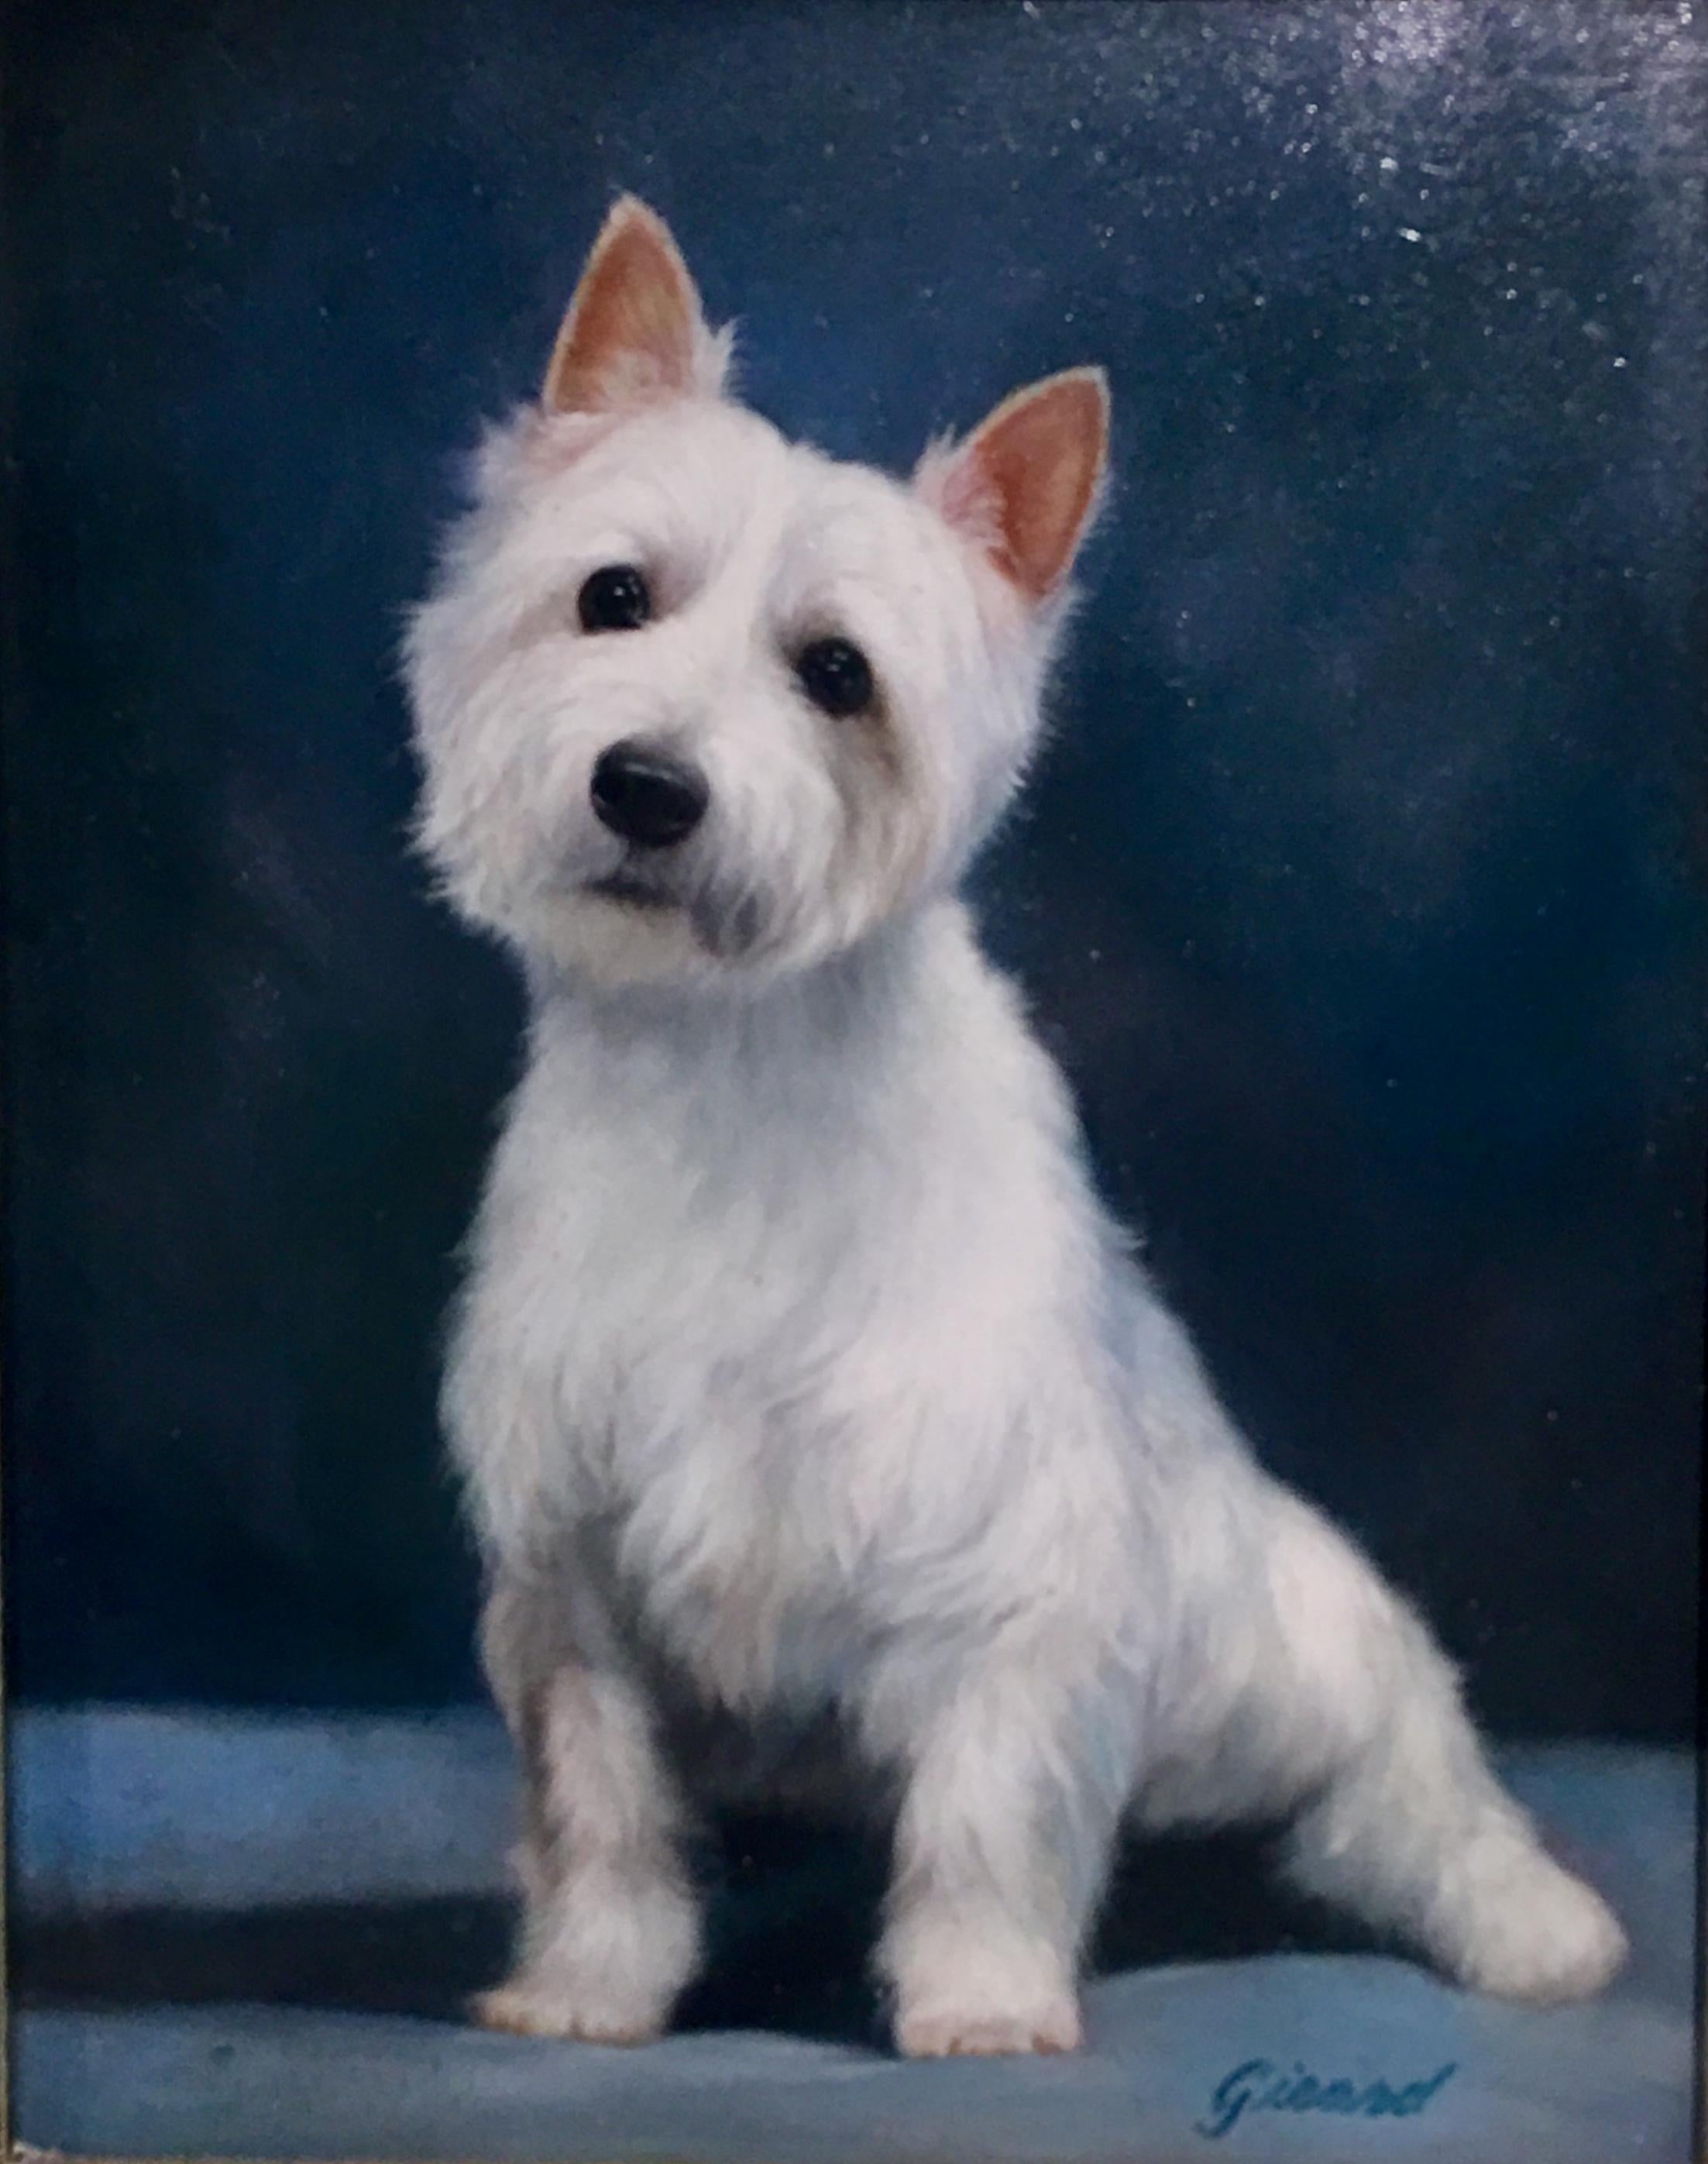 Exquisitely rendered, original oil on board, signed estate painting by French artist, Girard, depicts a seated white Scottish West Highland Terrier dog (Westie) with shining, soulful eyes, a yearning expression and a lush, full coat with tiny,